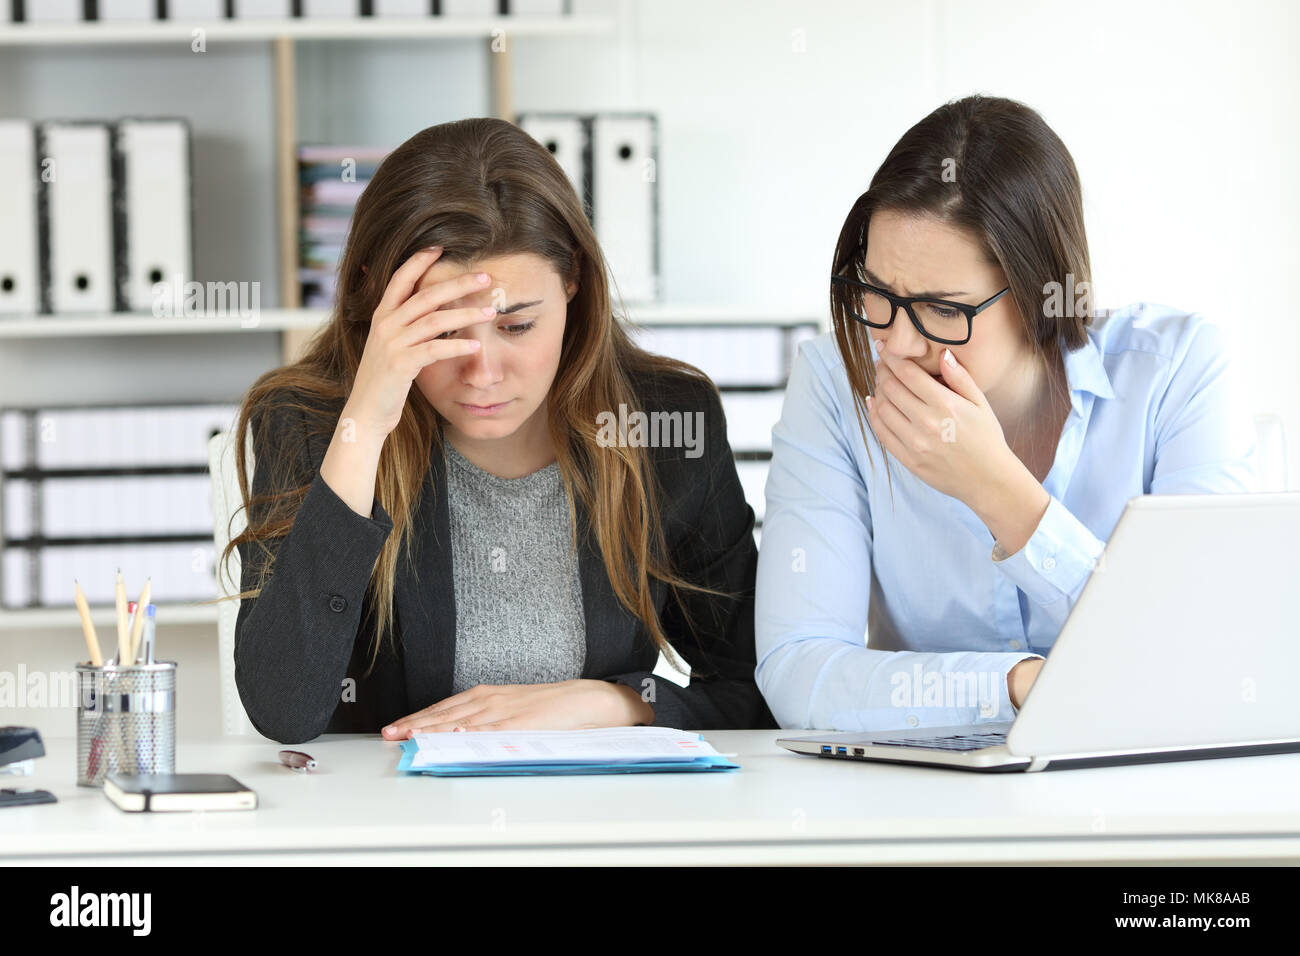 Worried office workers discovering a mistake in a document Stock Photo